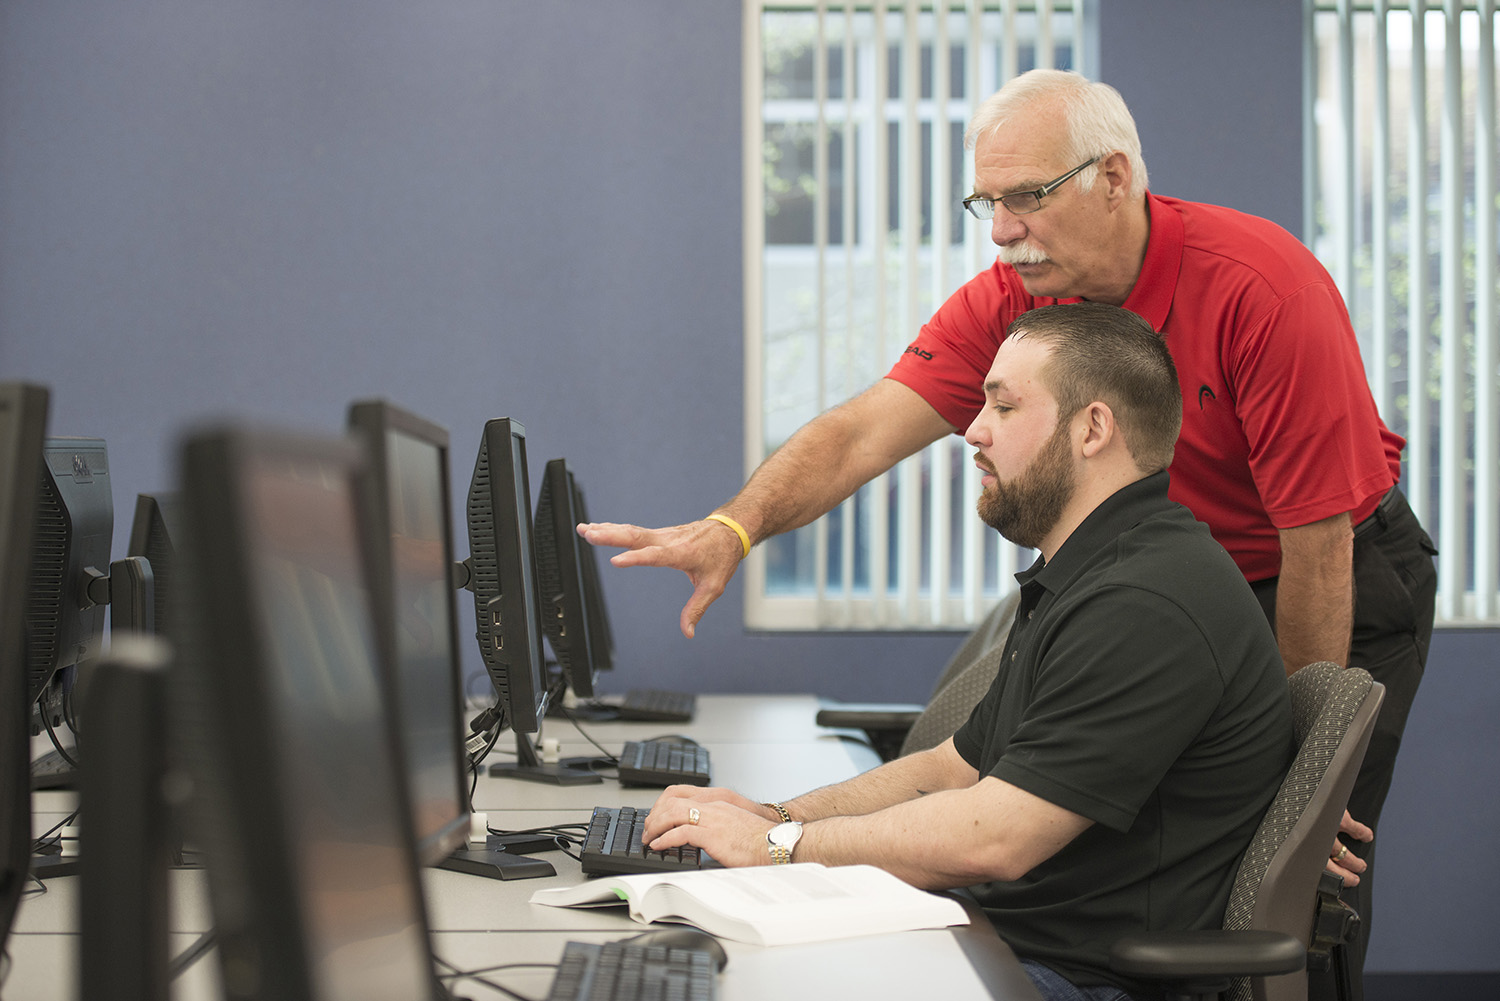 An instructor helps a student in a computer lab.